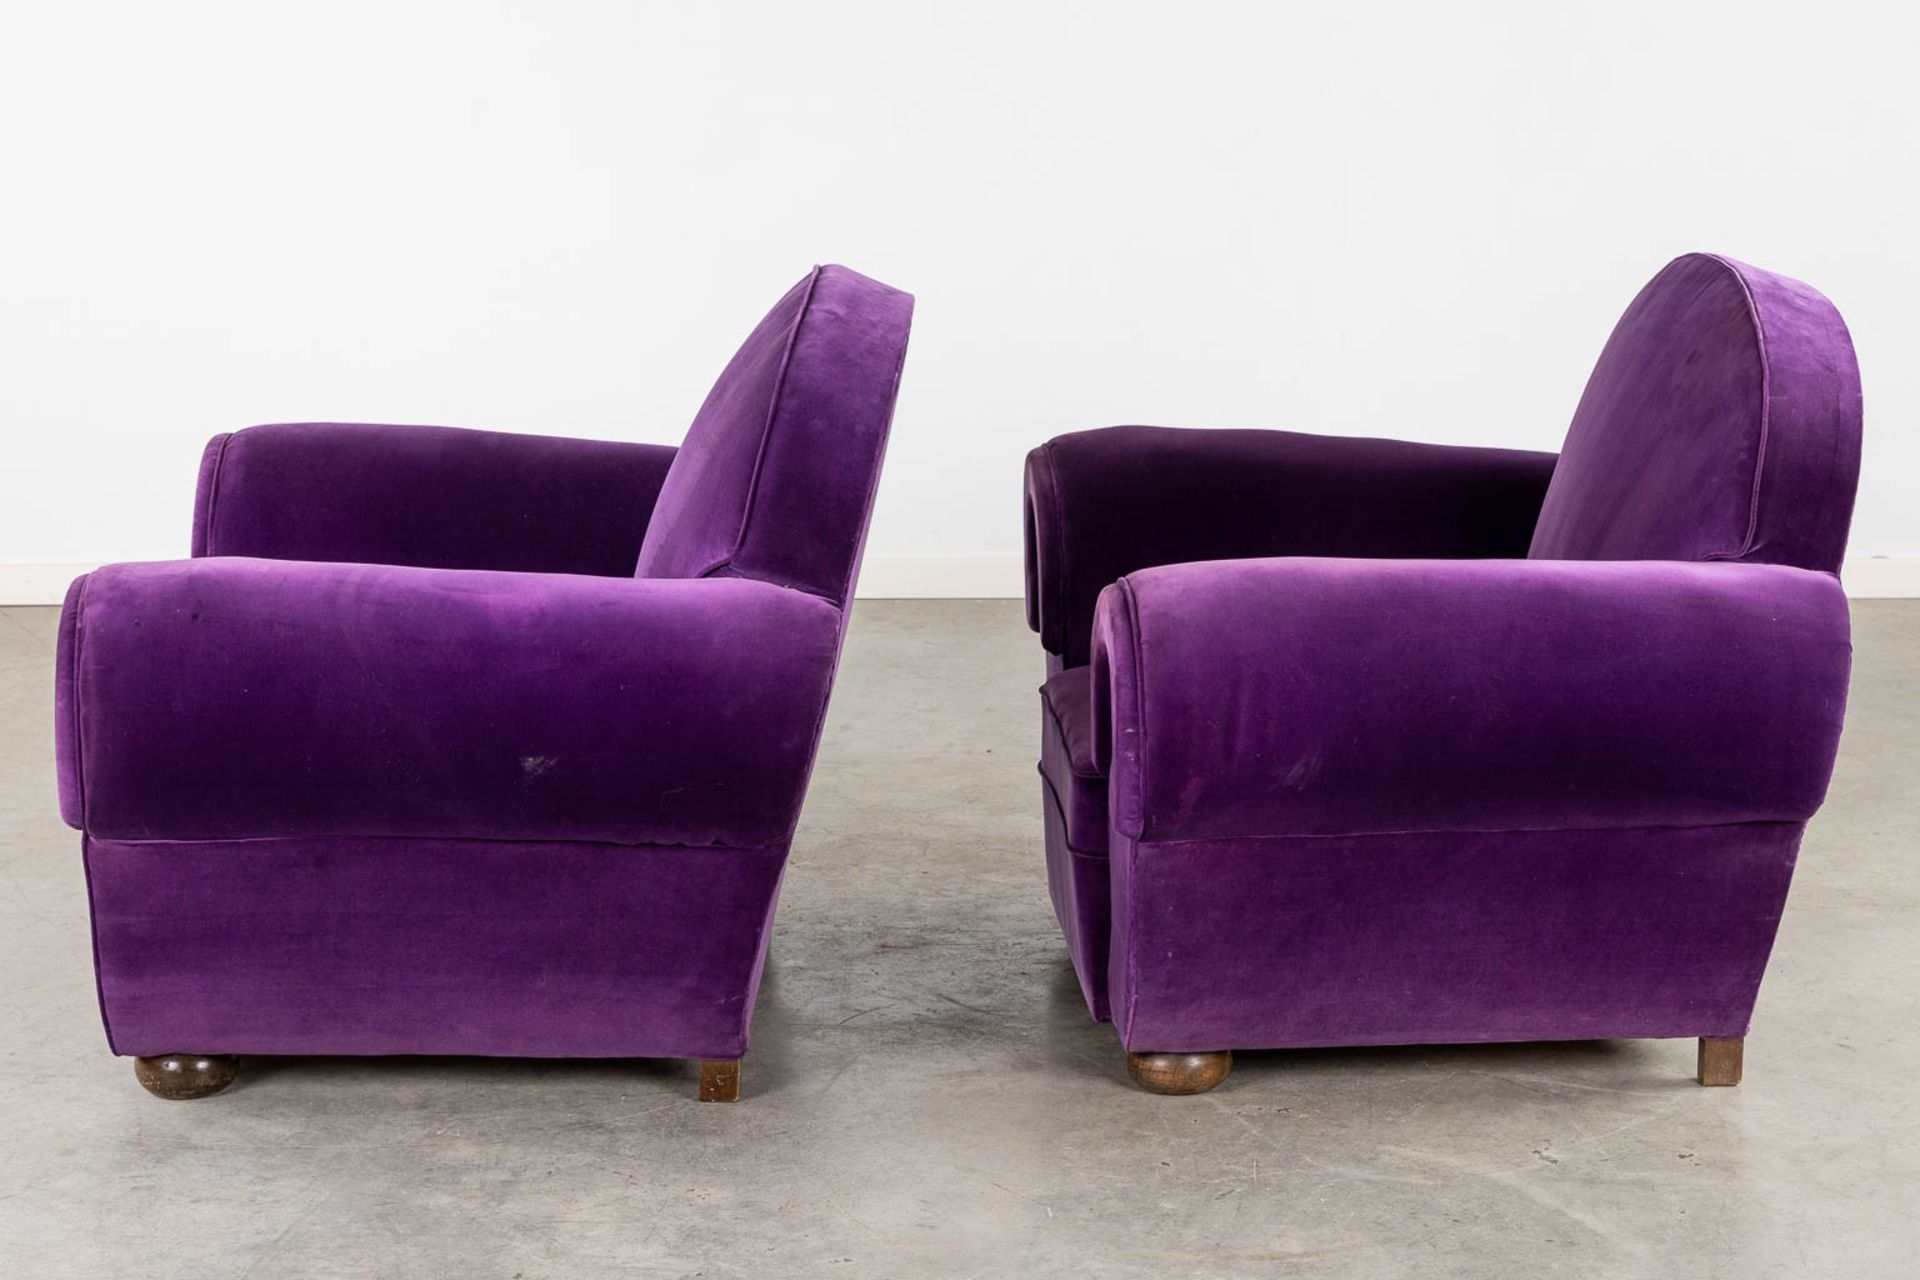 A pair of armchairs with purple fabric upholstry, France, Art Deco. (L:84 x W:109 x H:87 cm) - Image 4 of 10